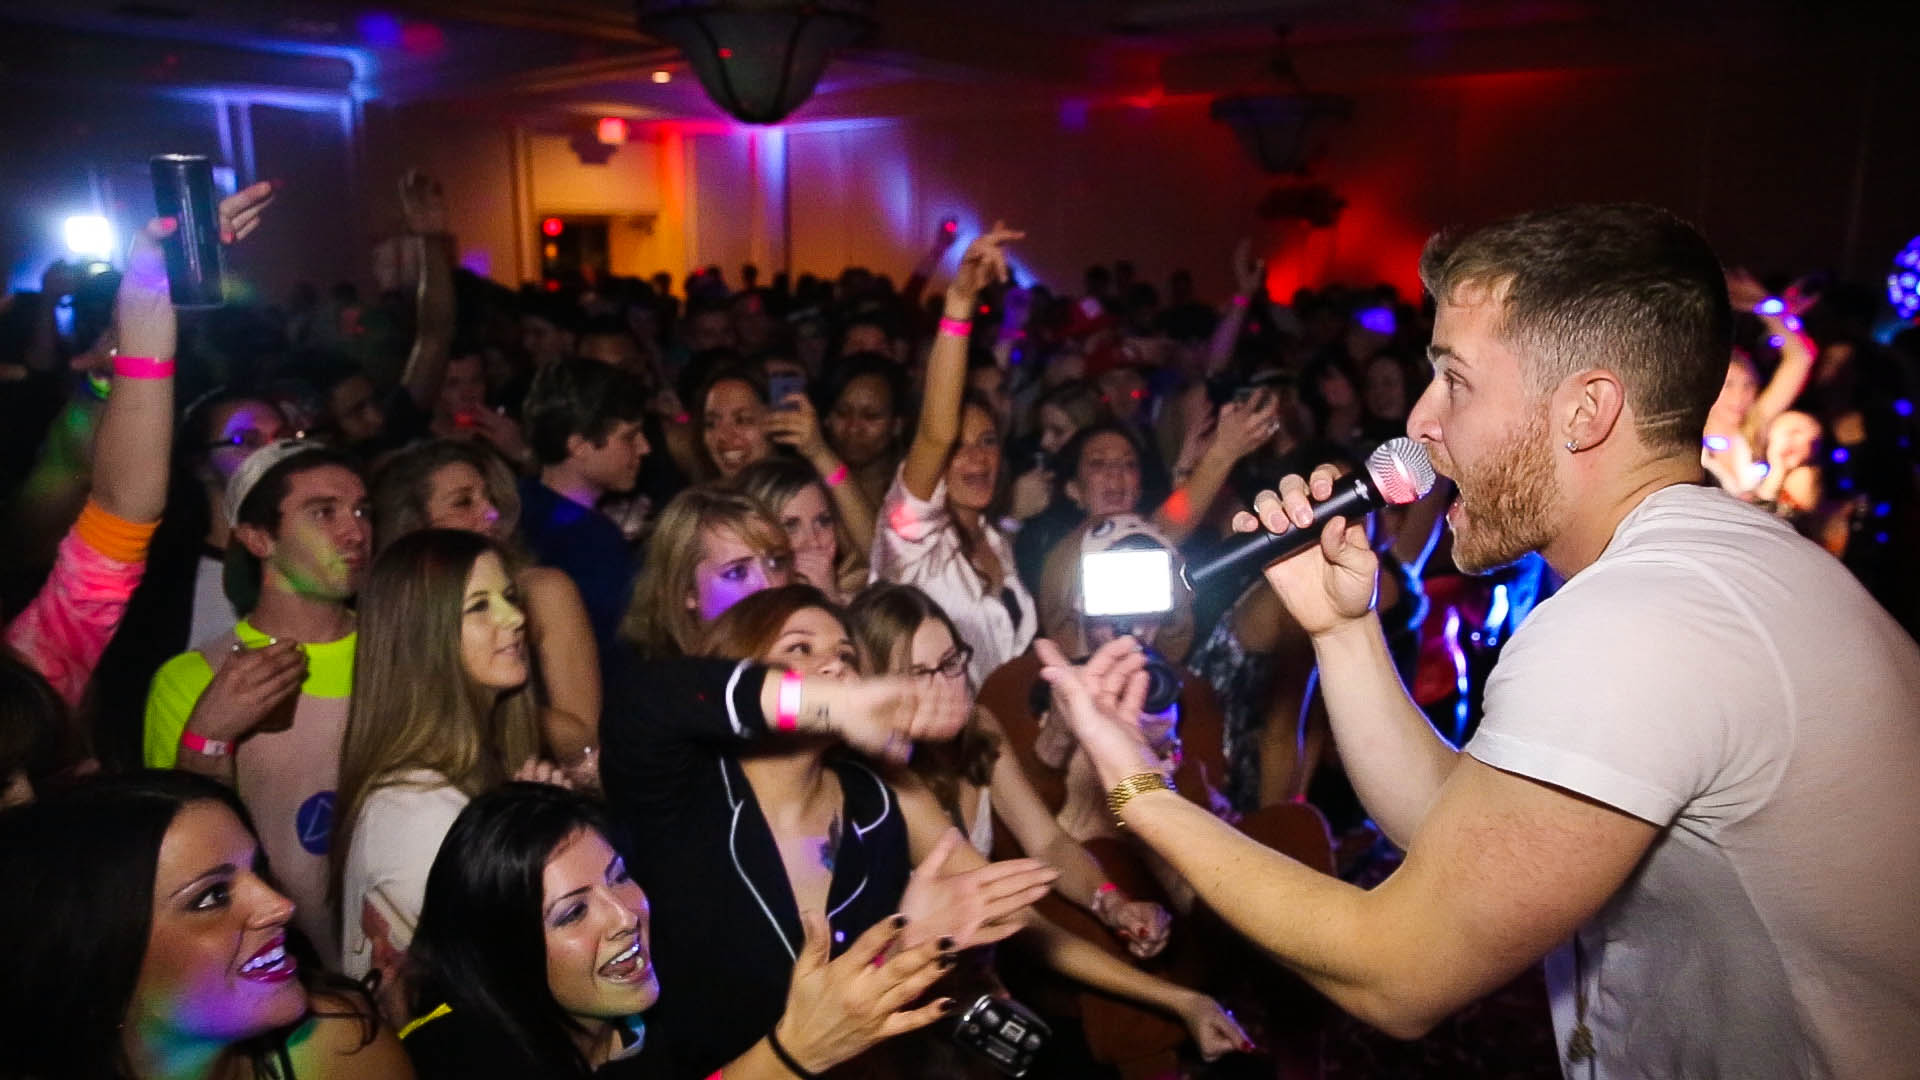 Mike Posner performing at Singles Mingle Pajama Party in Troy, MI 2/7/14
mojointhemorning.com
